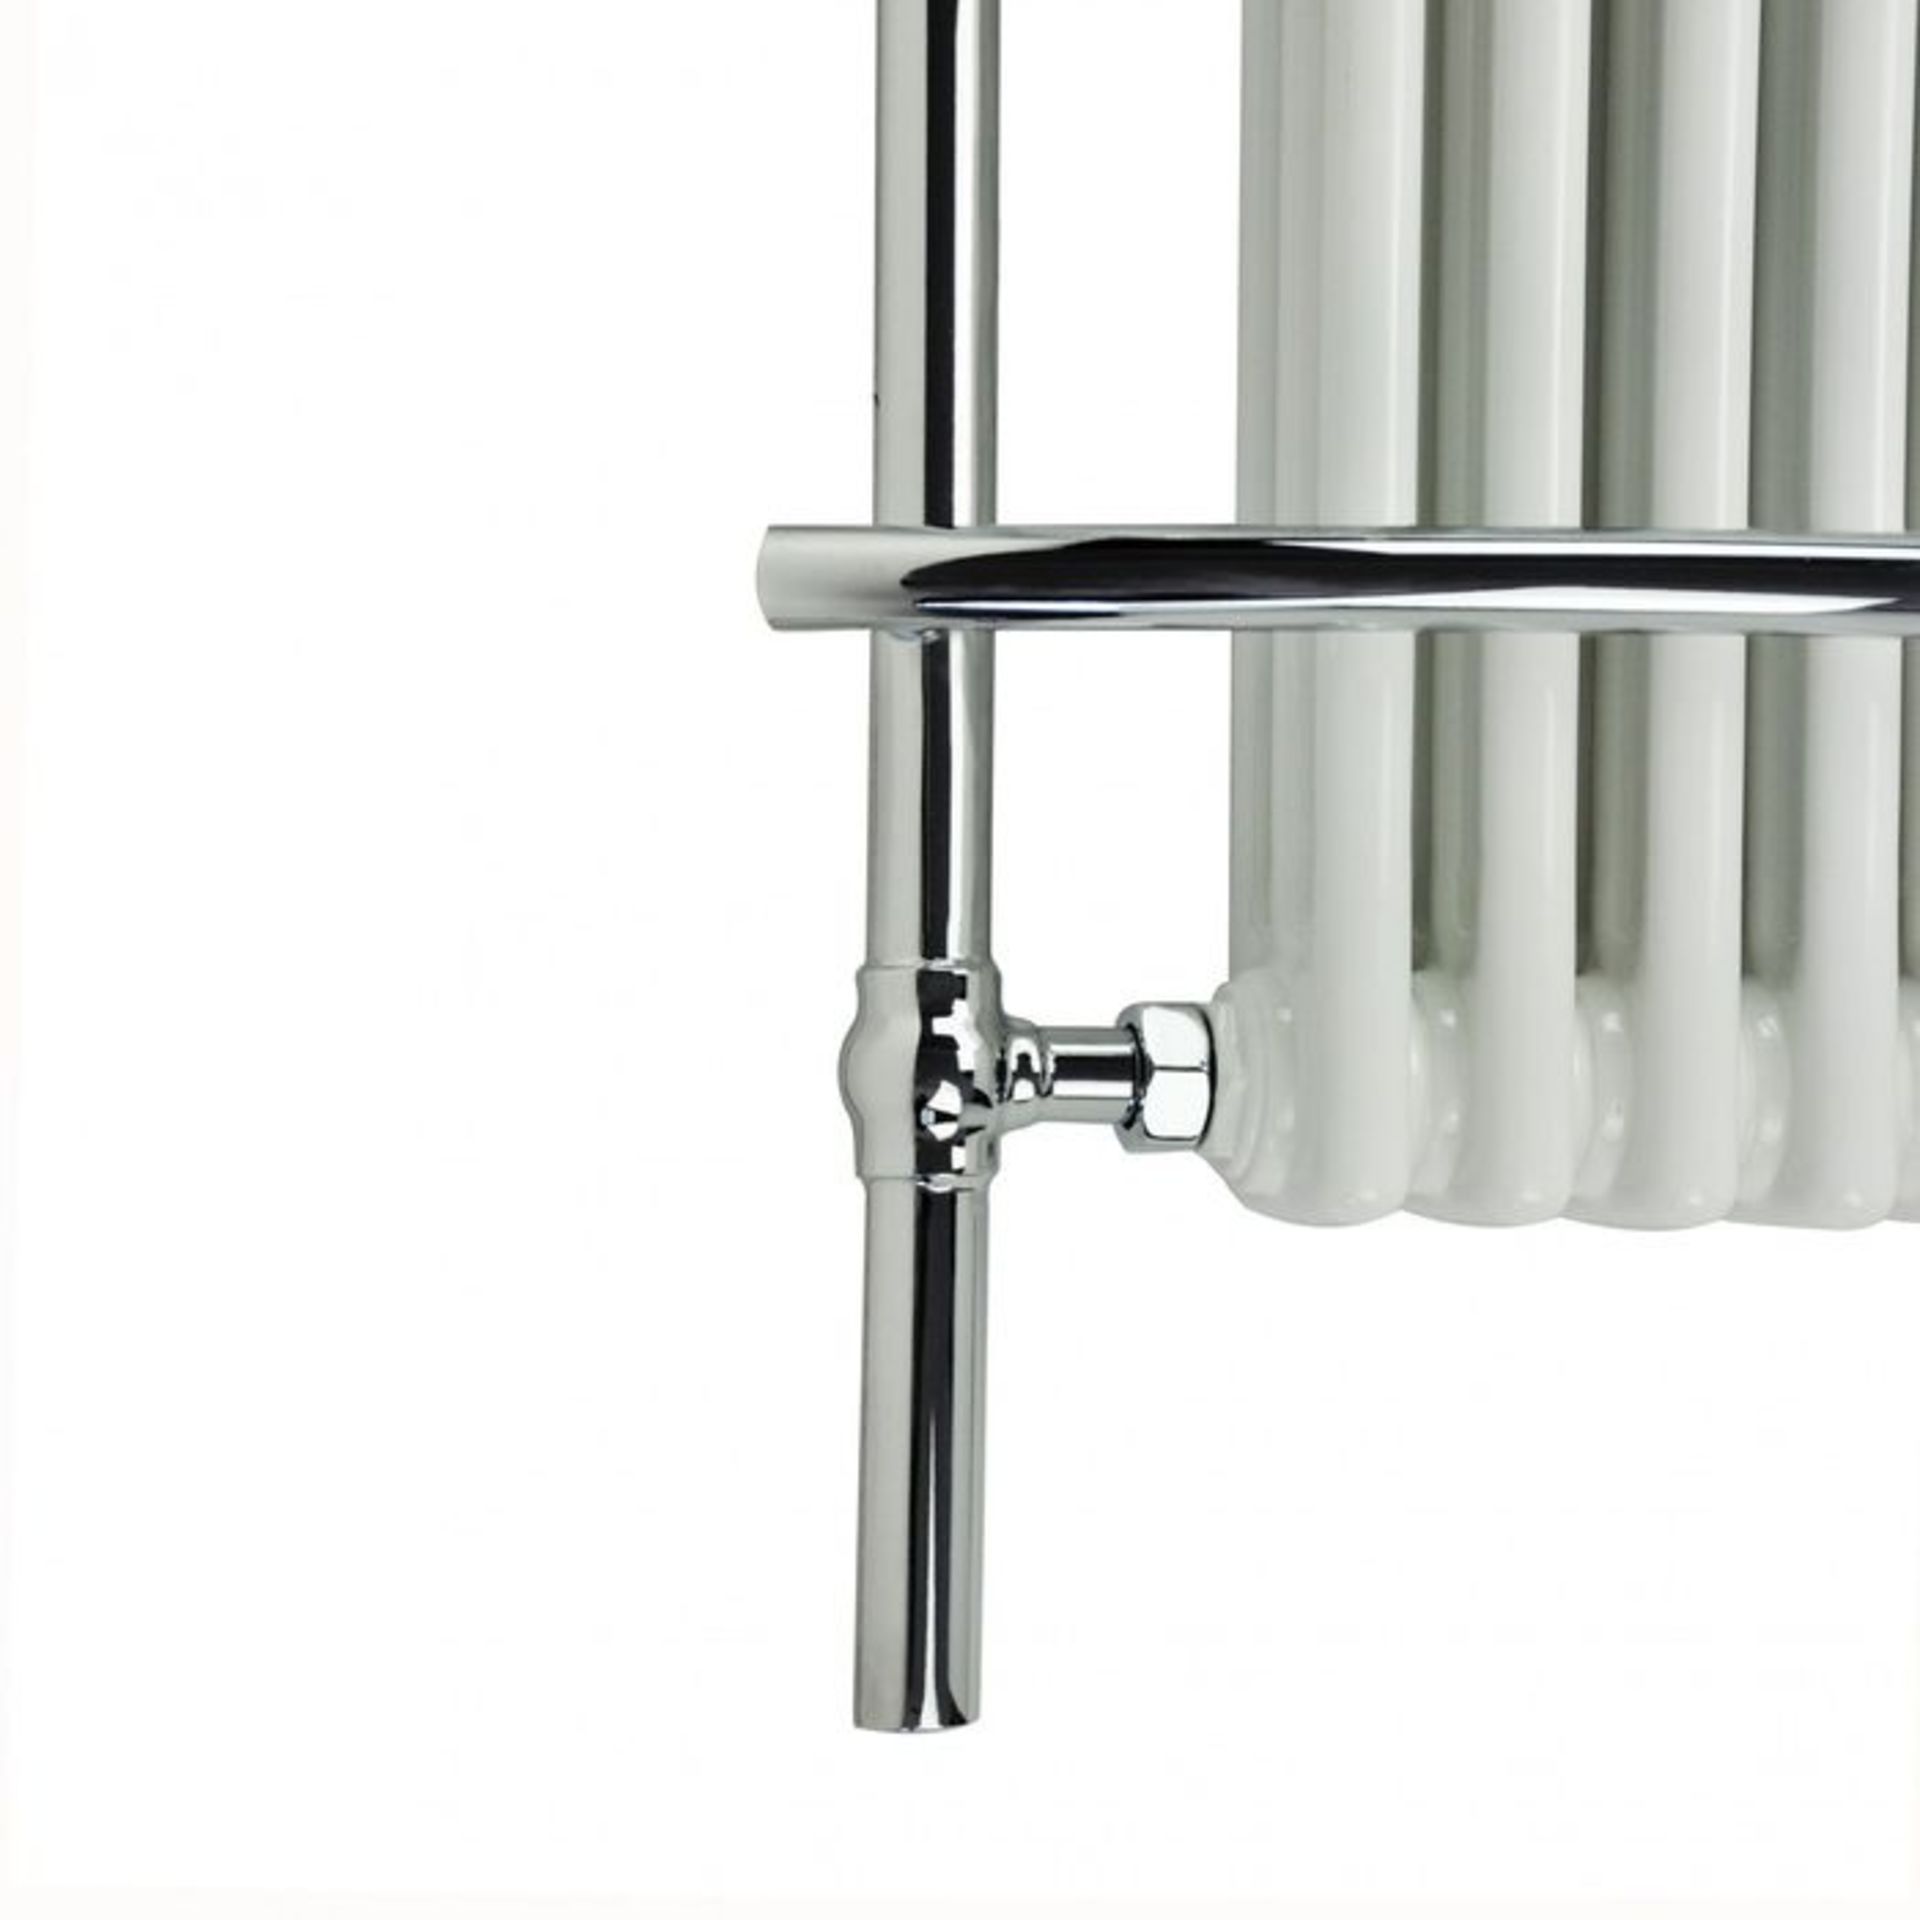 (G51) 1000x635mm Traditional White Wall Mounted Towel Rail Radiator - Victoria Premium RRP £341.99 - Image 5 of 6